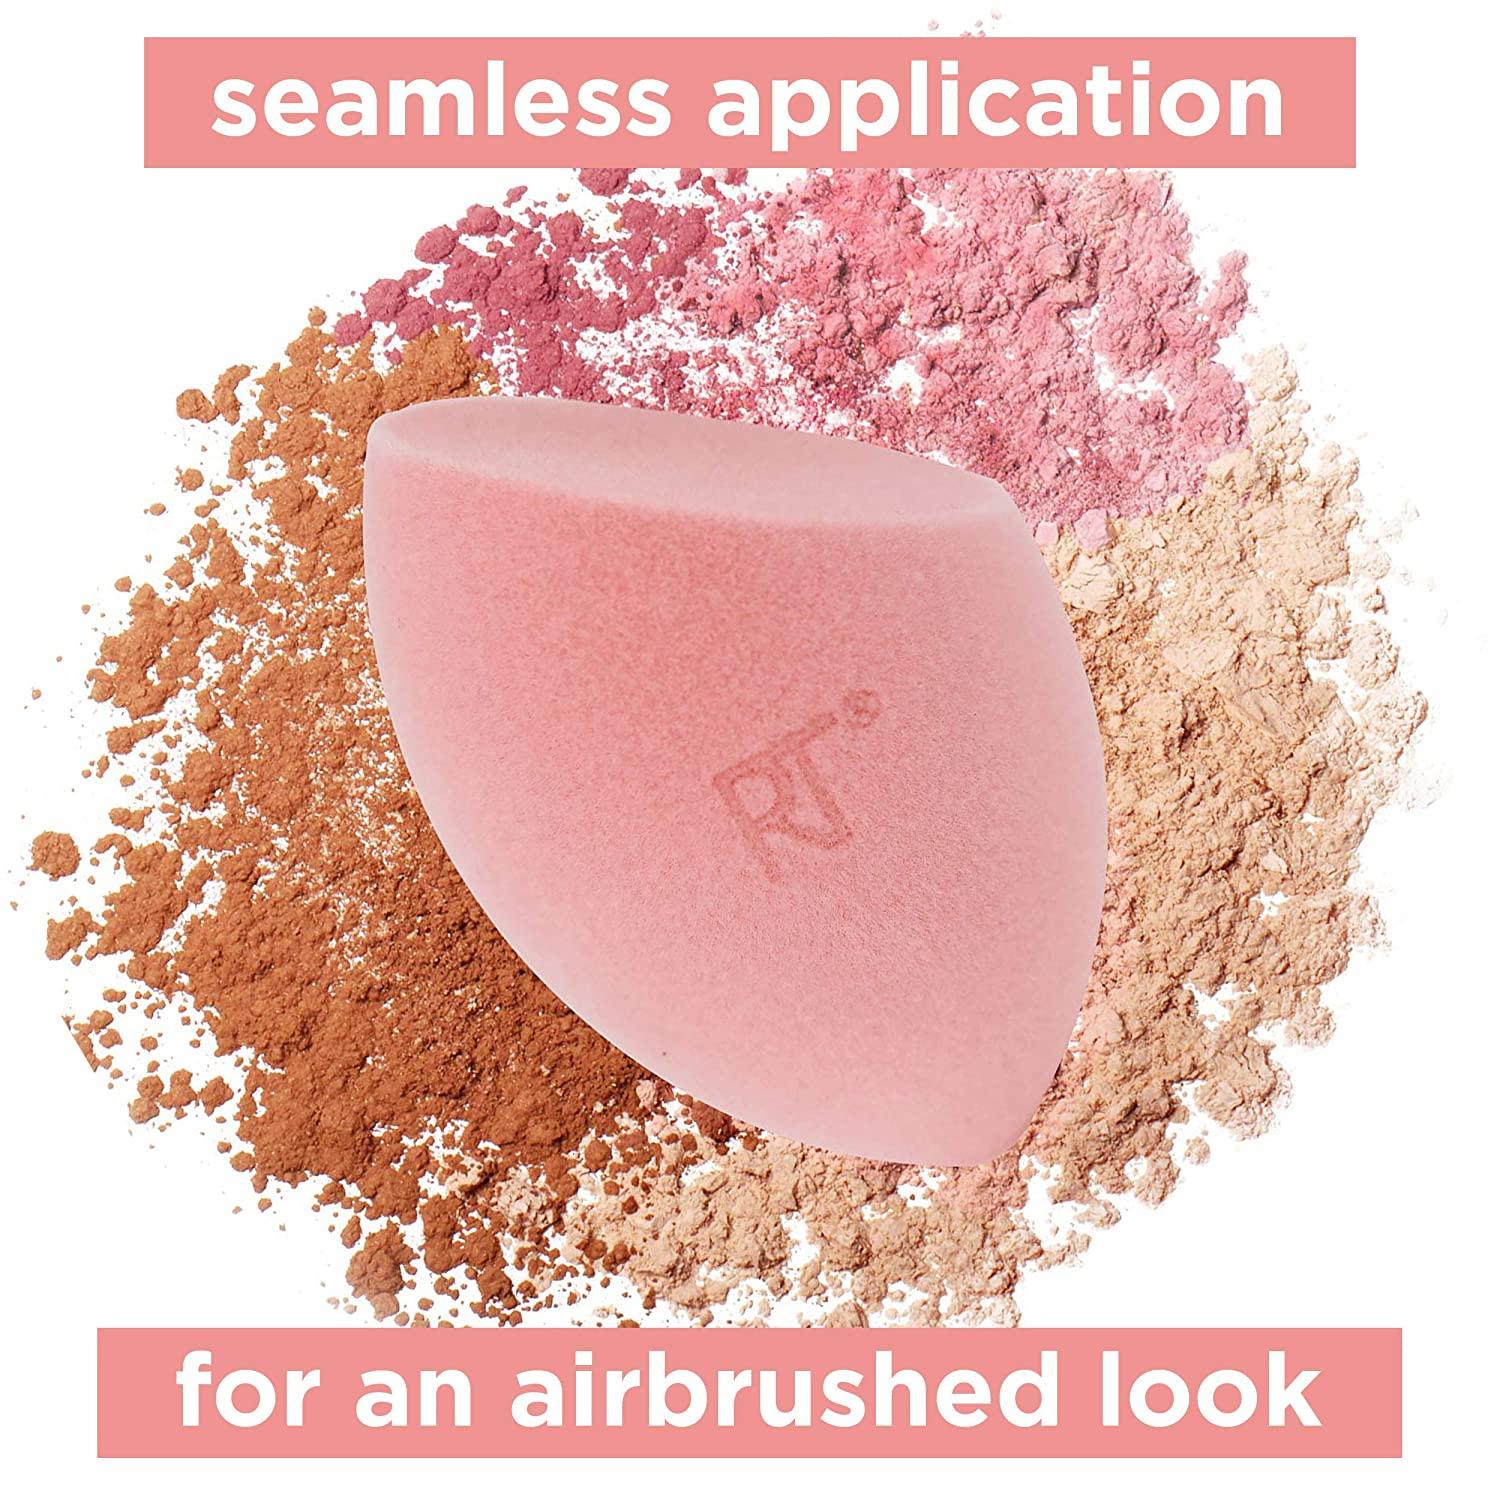 Real Techniques Miracle Powder Sponges 2 Pack